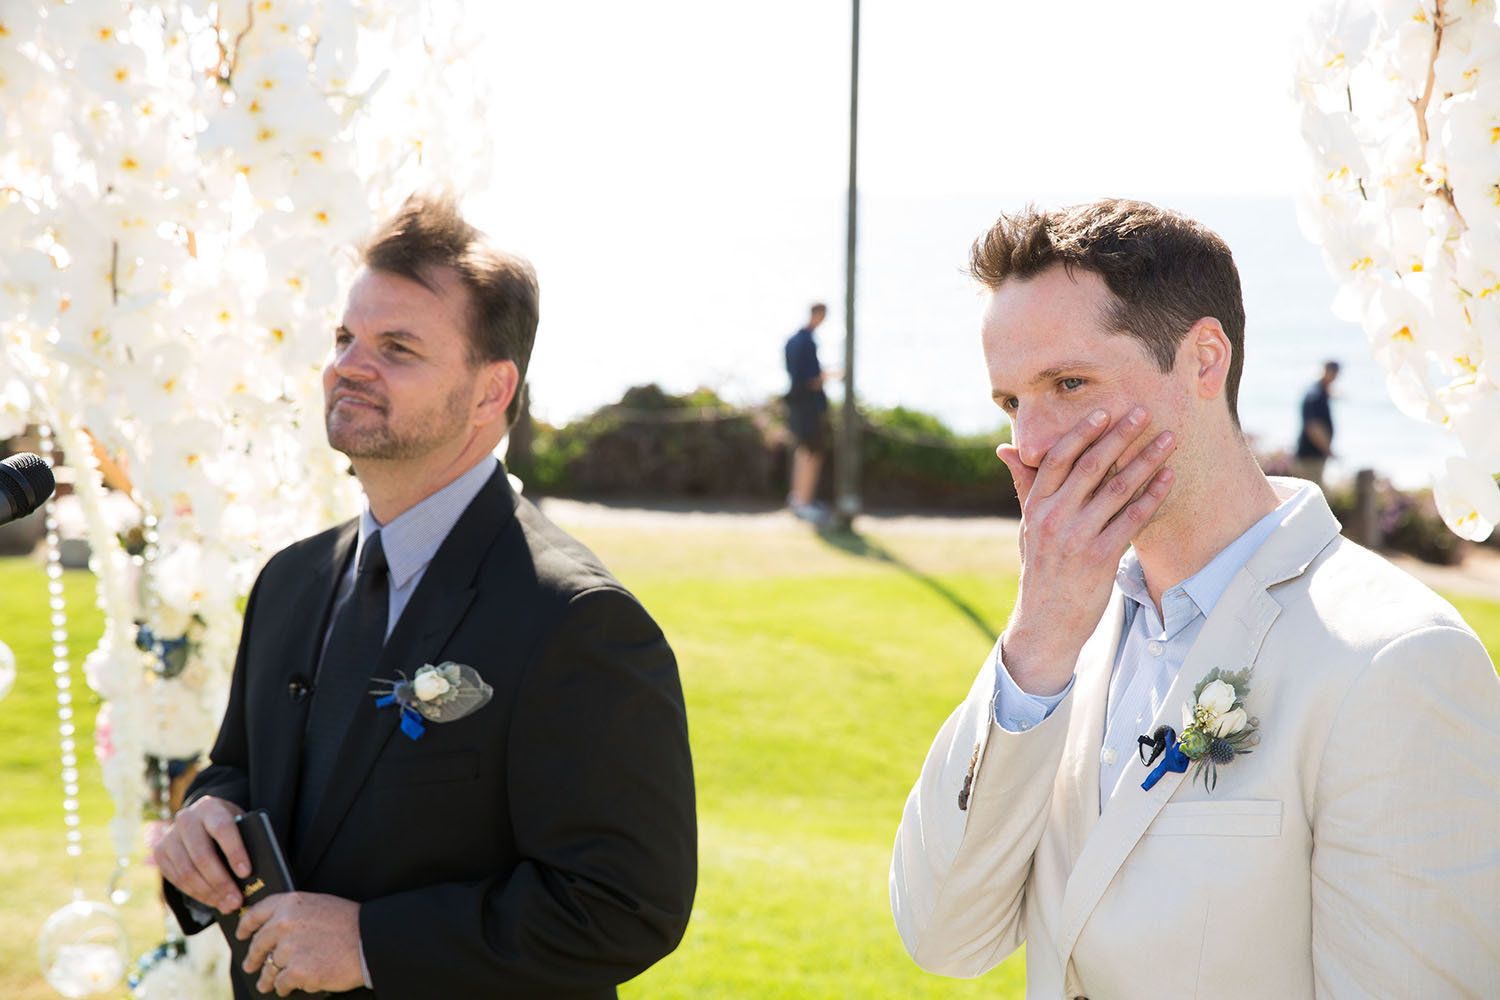 Emotional reaction to seeing the bride for the first time